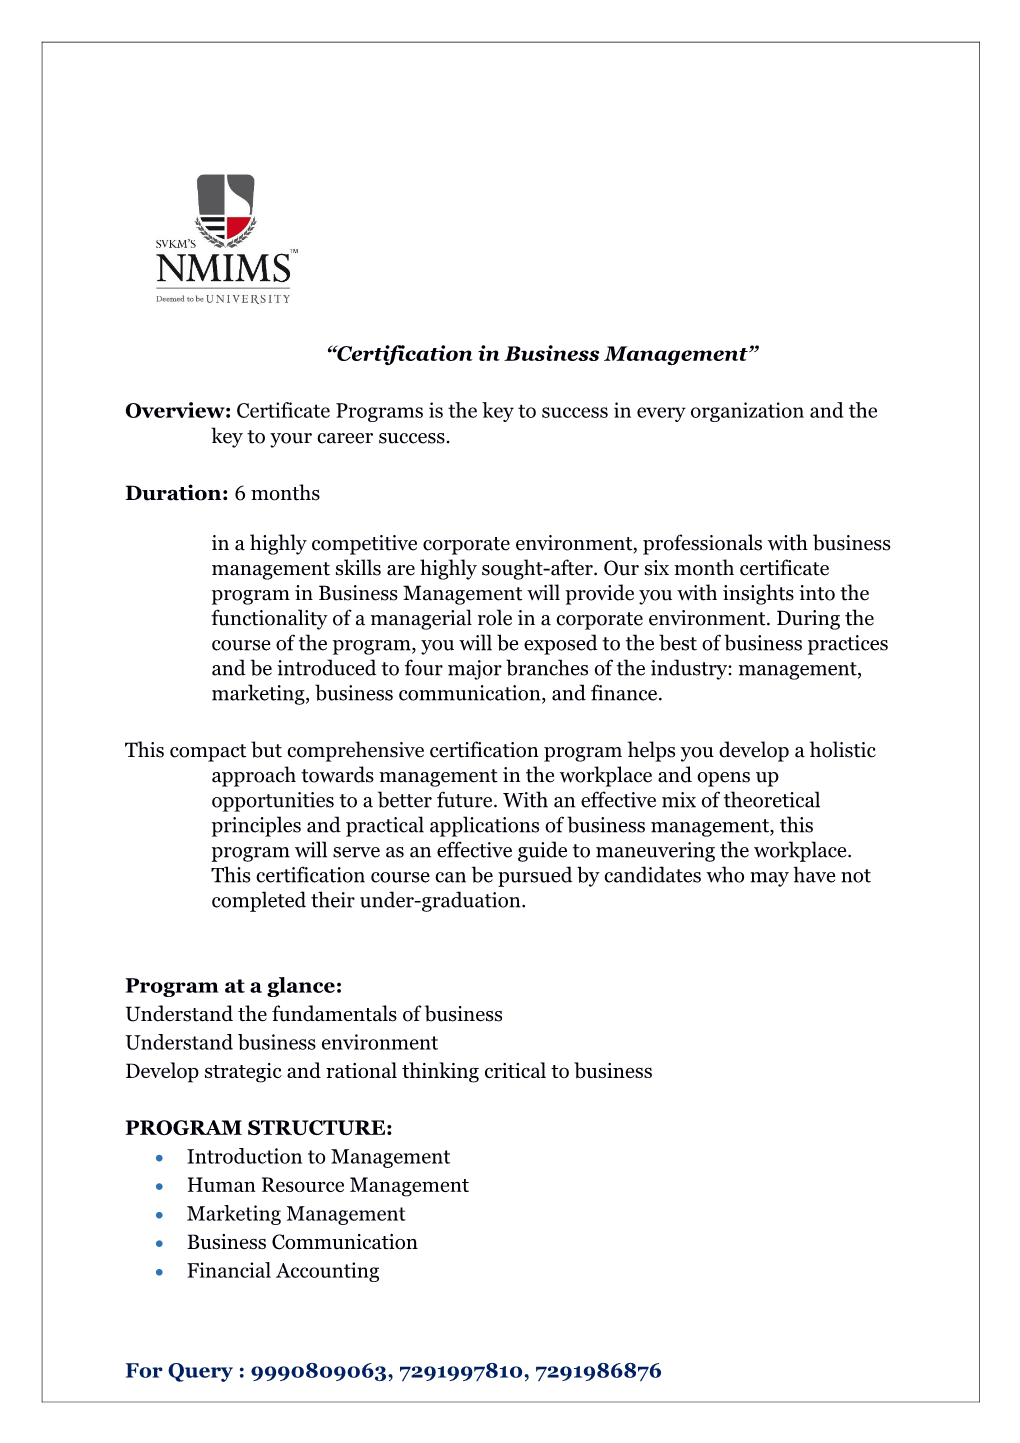 Certification in Business Management